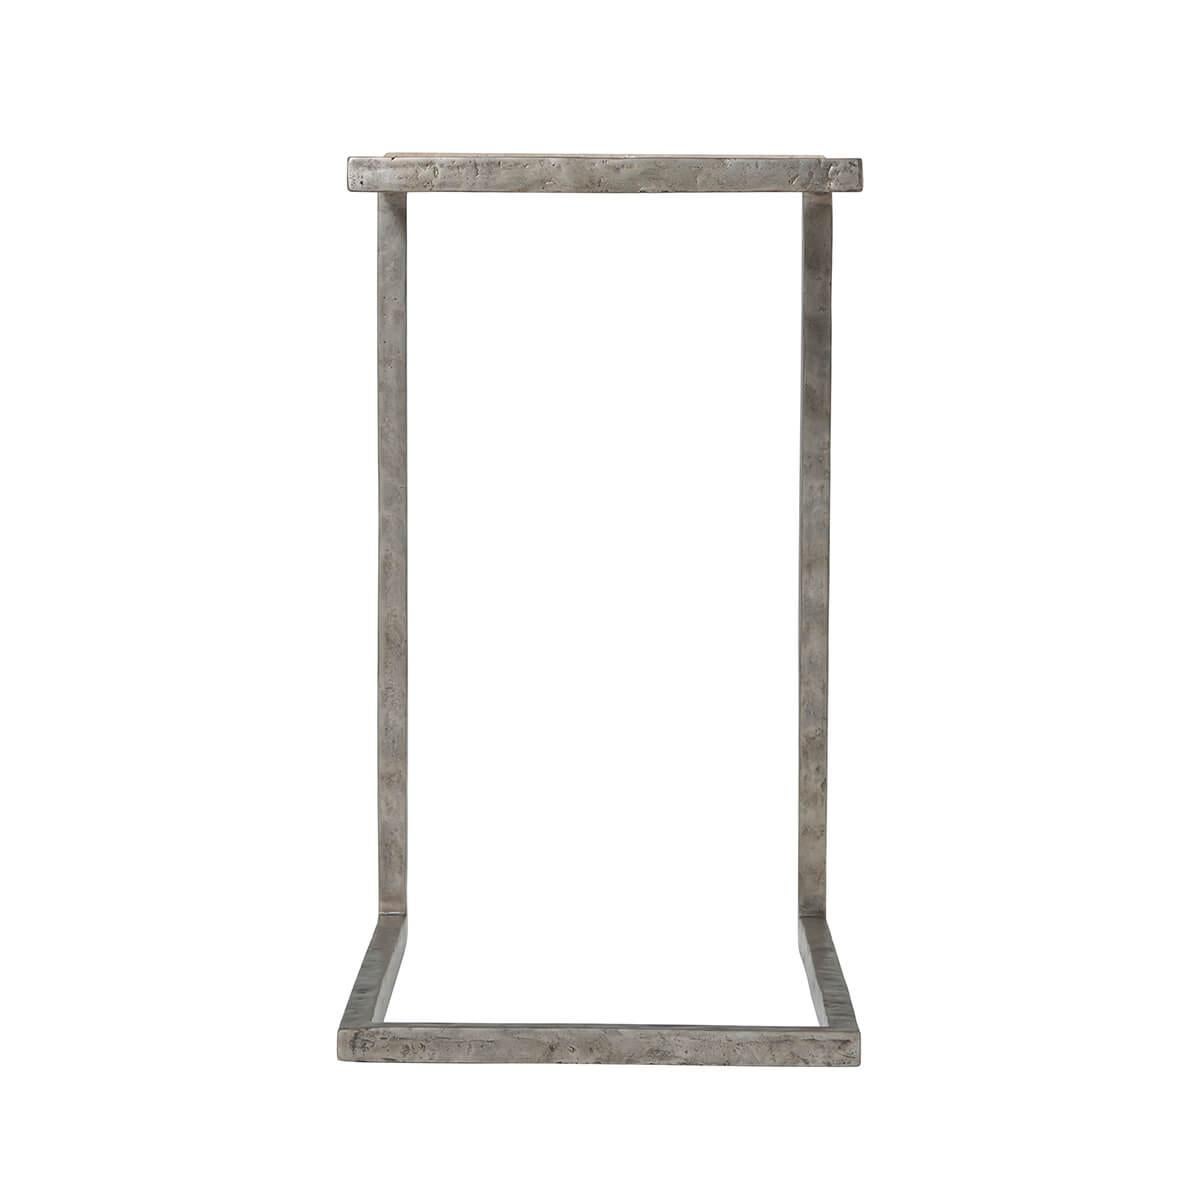 with a rectangular cantilever top, an inset honed Travertine top and a cube form distressed Vintage style metal base.

Dimensions: 12